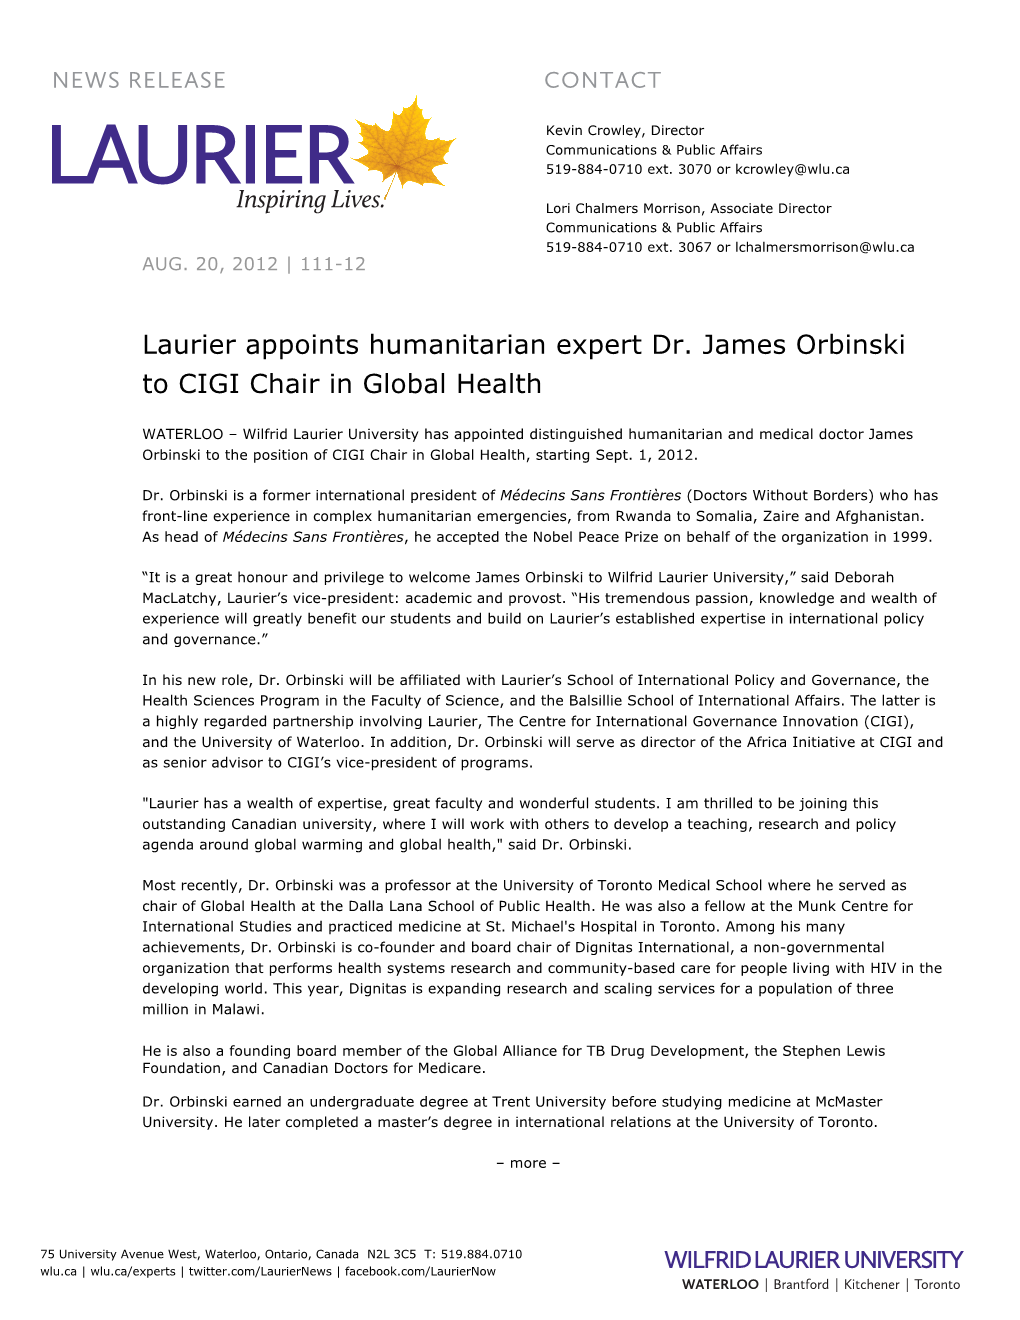 Laurier Appoints Humanitarian Expert Dr. James Orbinski to CIGI Chair in Global Health